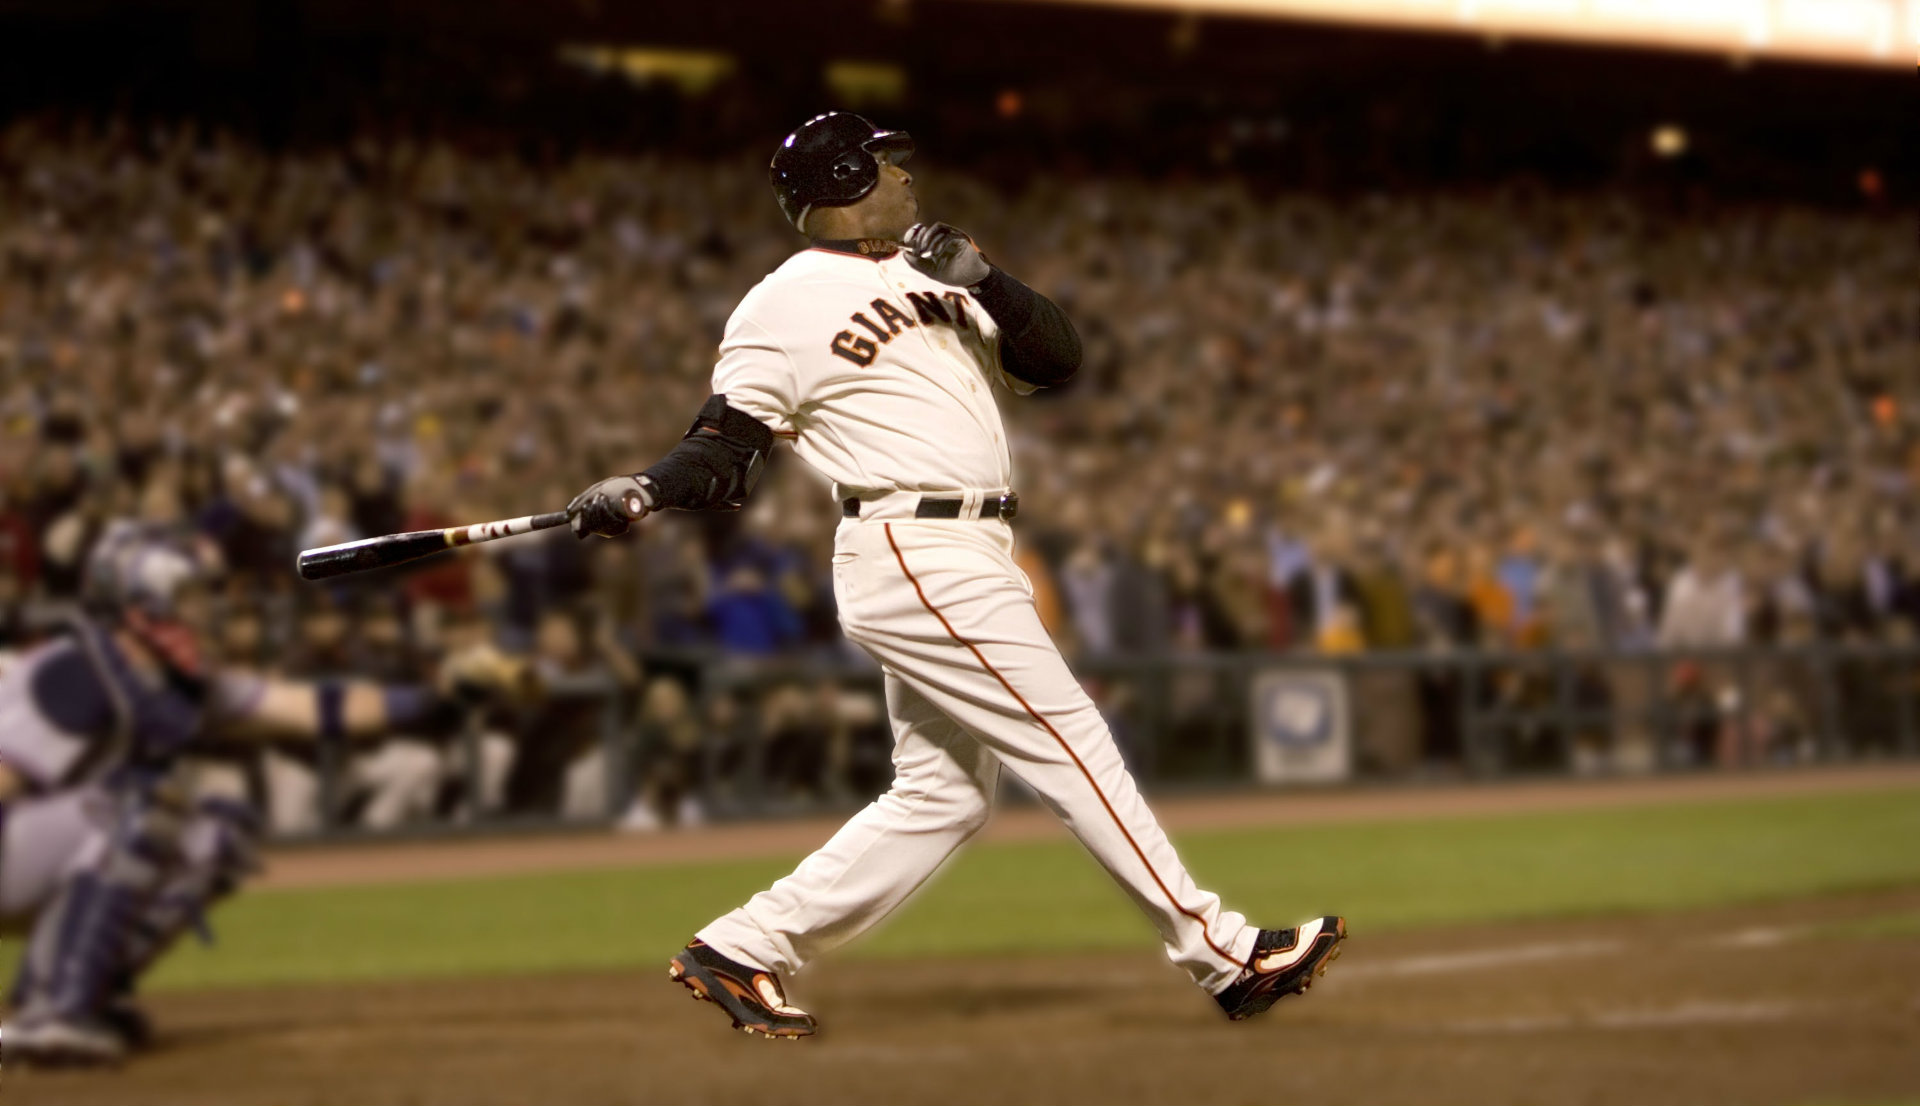 Nightengale: San Francisco Opens Arms for Barry Bonds Again